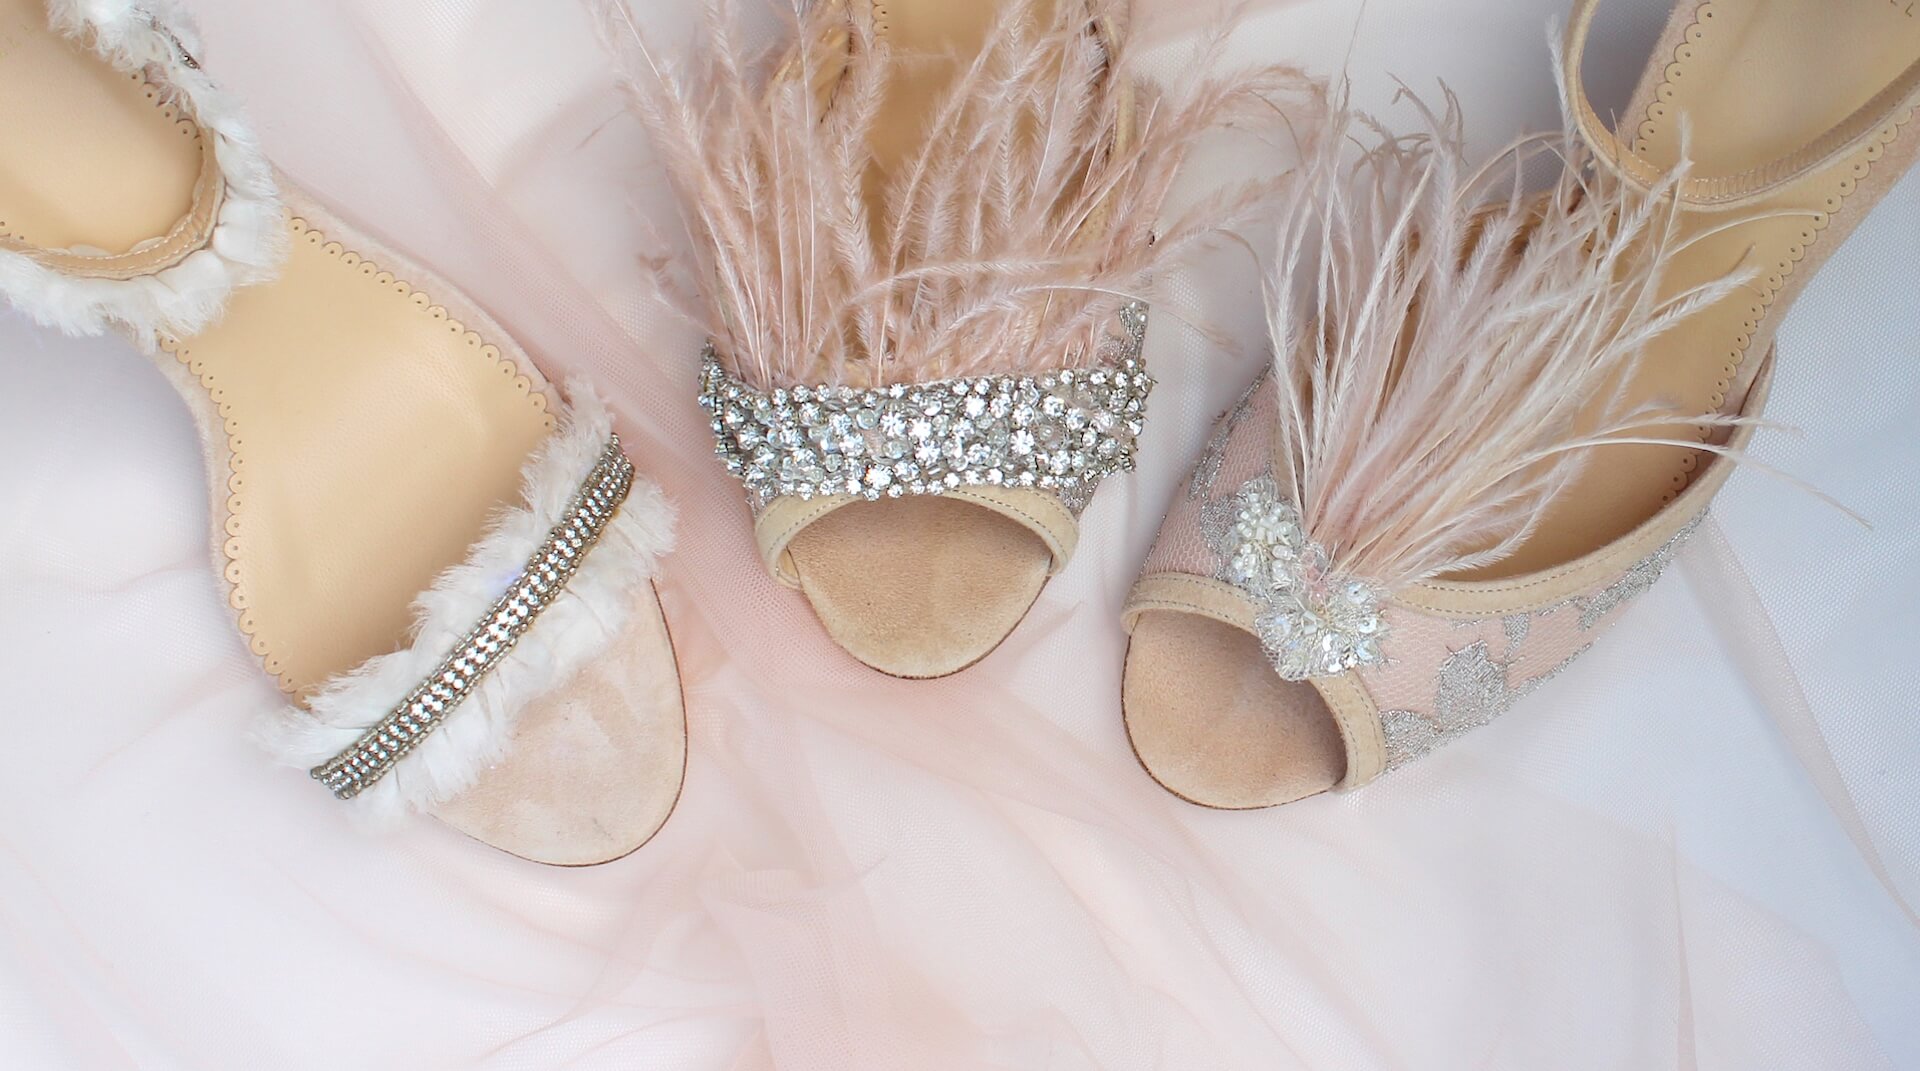 Wedding shoes designed by Diane Hassall